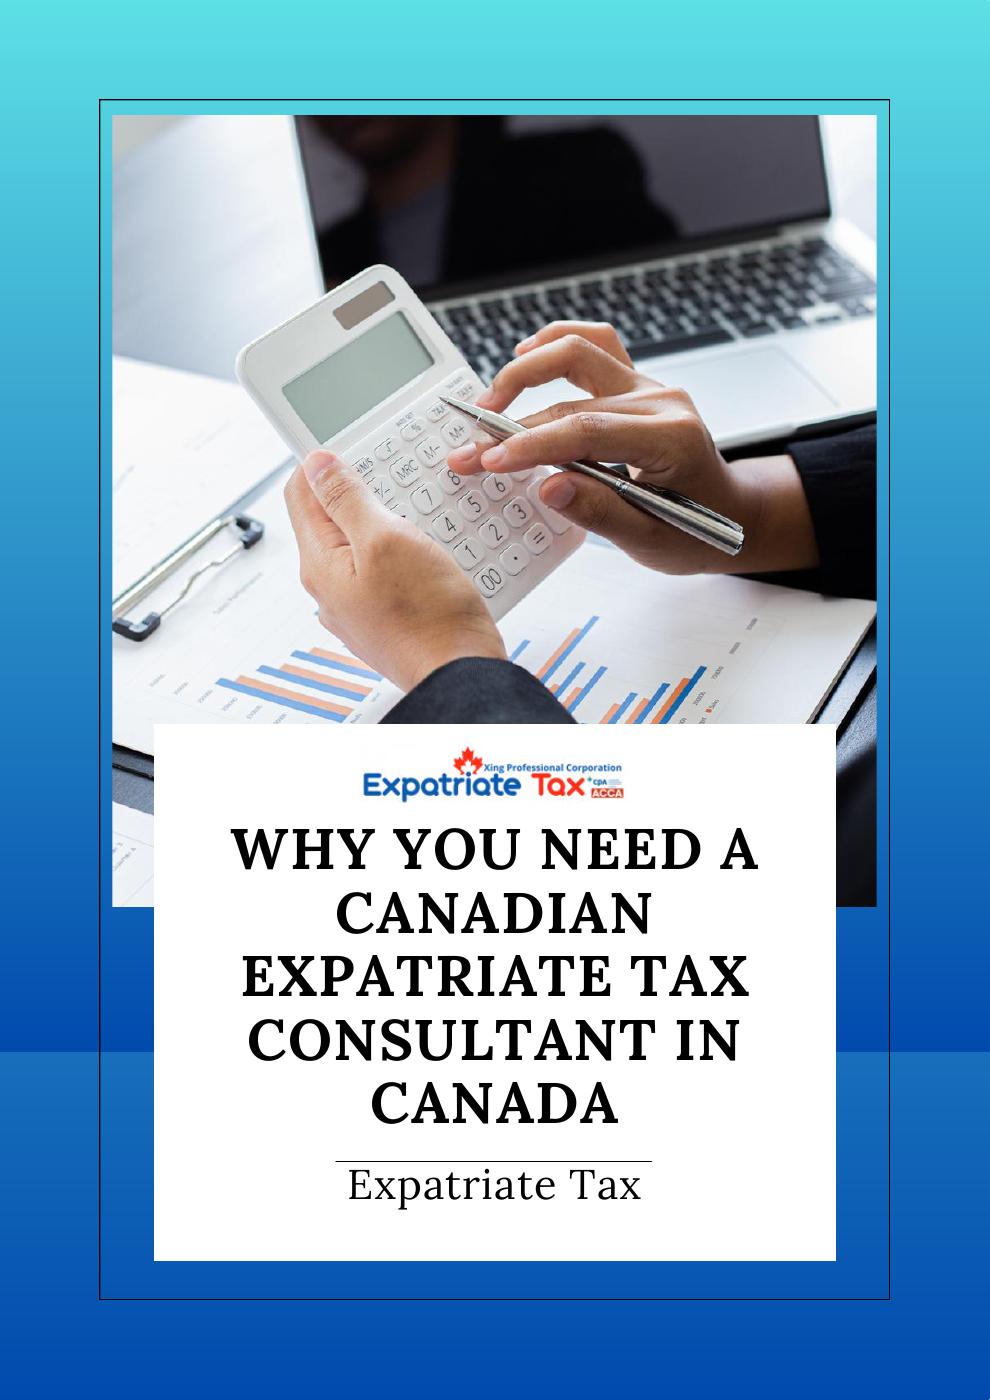 Why You Need a Canadian Expatriate Tax Consultant in Canada?